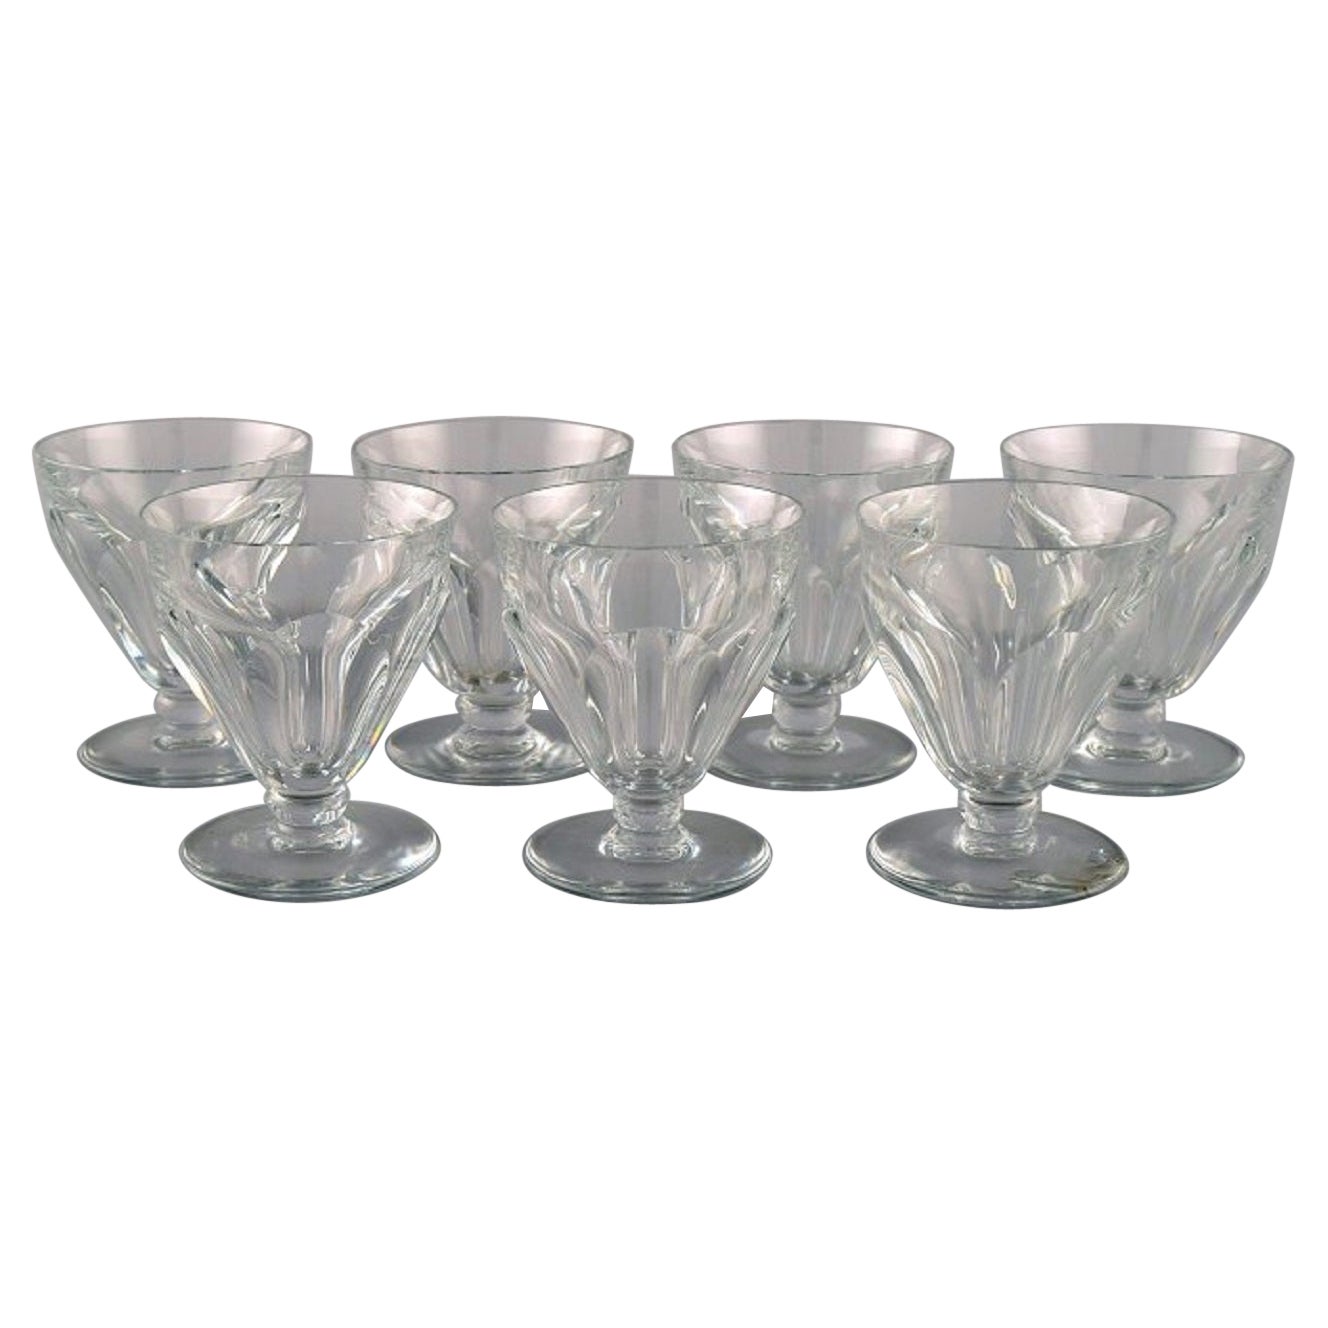 Baccarat, France, Seven Tallyrand Glasses in Clear Mouth-Blown Crystal Glass